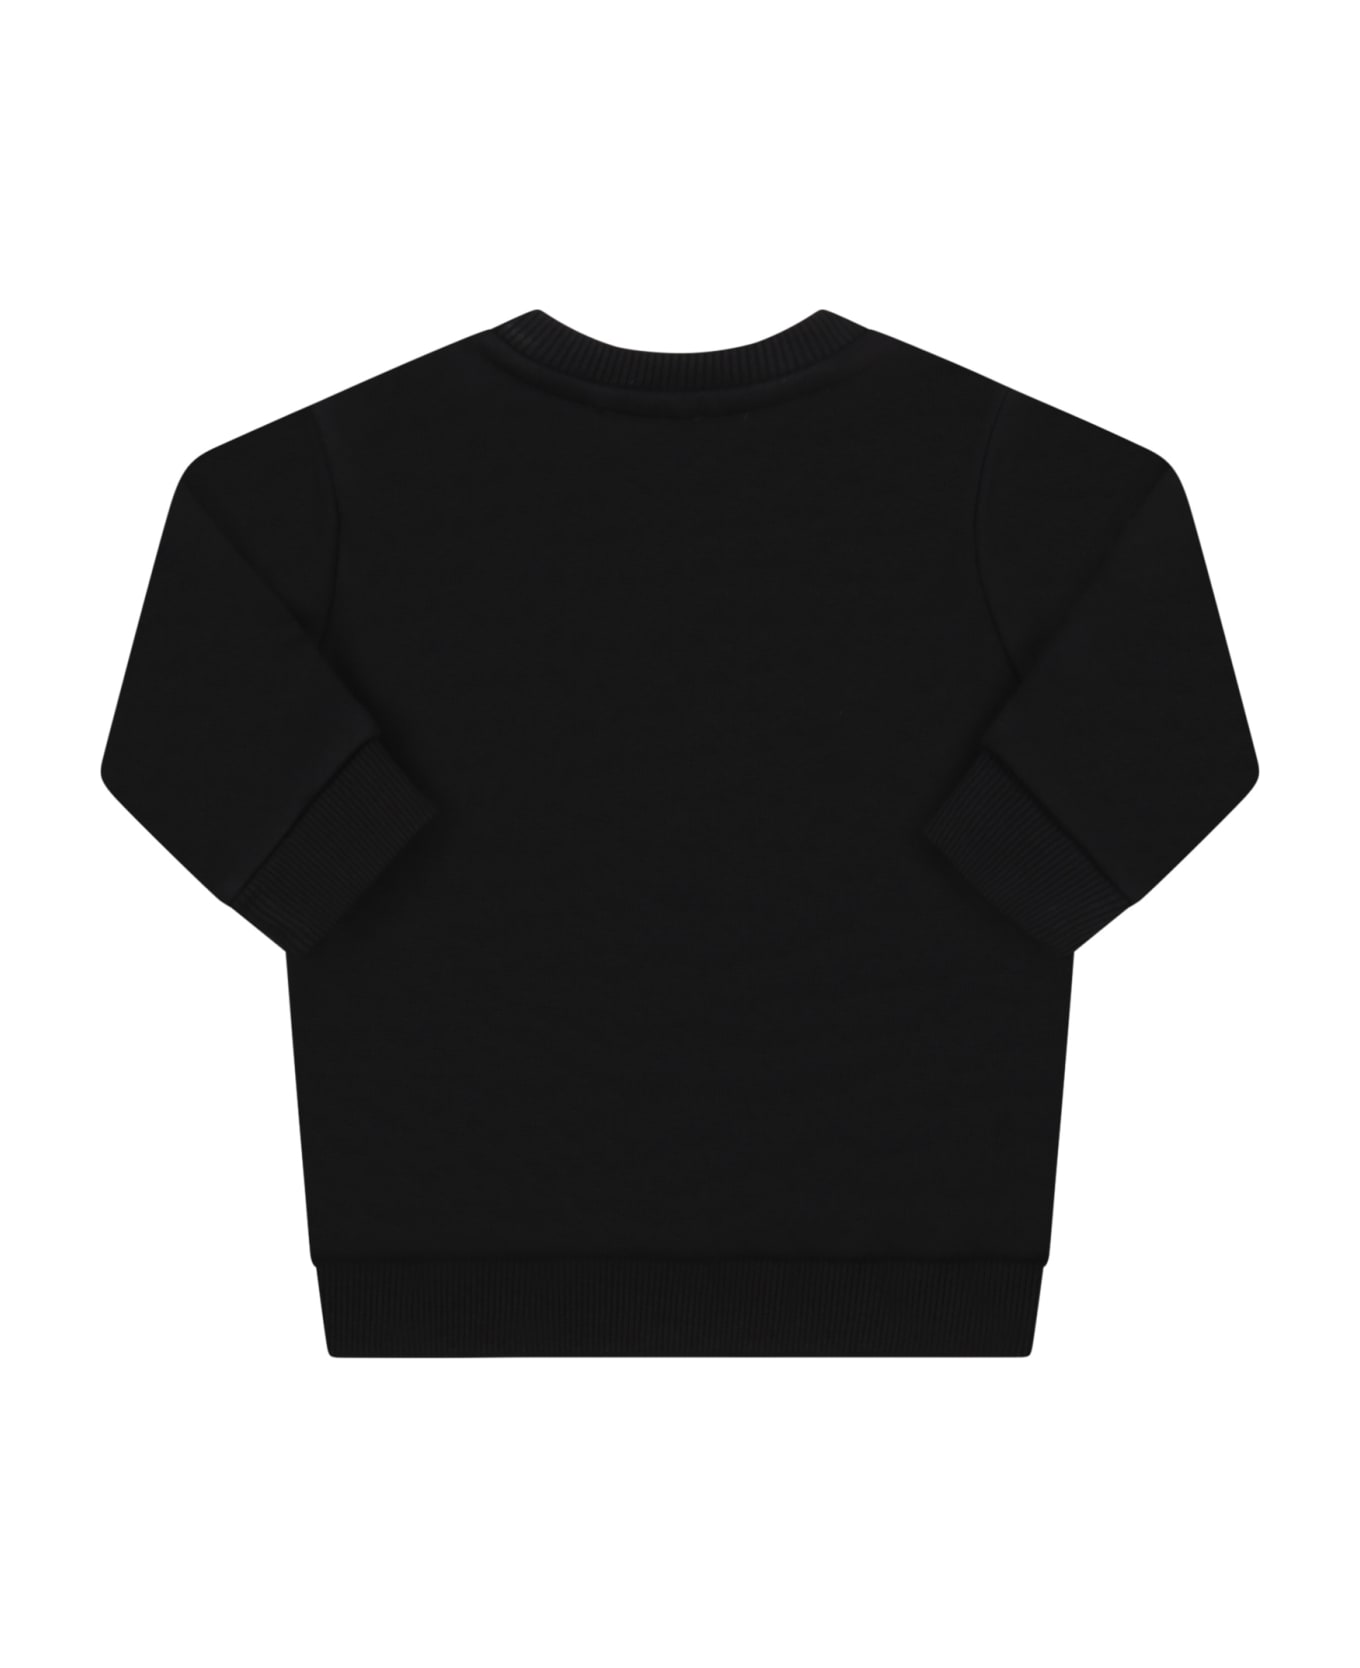 Givenchy Black Sweatshirt For Baby Kids With Logo - Black